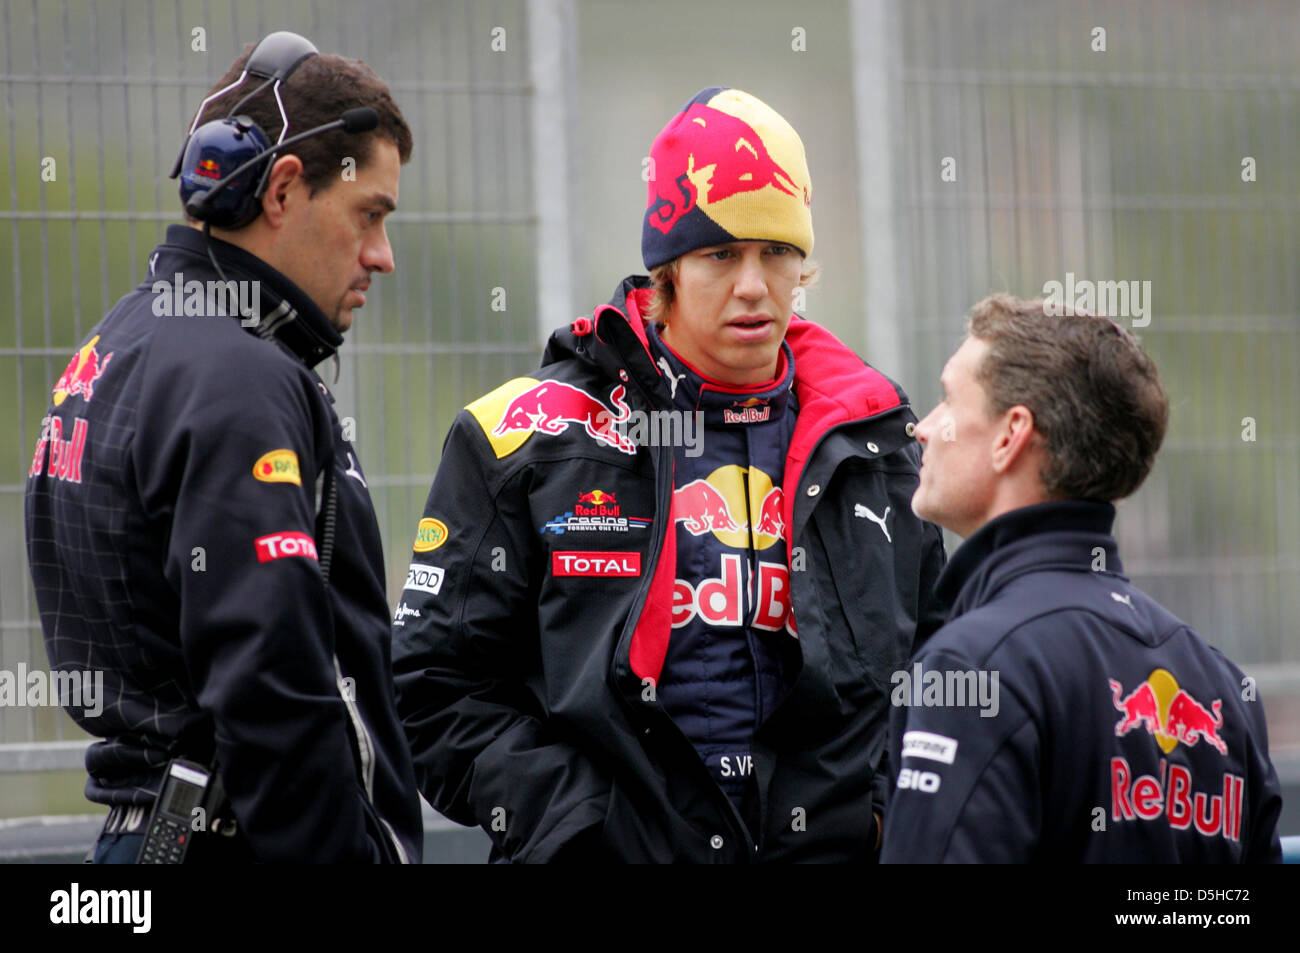 German Formula One driver Sebastian Vettel of Red Bull (C) talks to race engineer Guillaume Rocquelin (L) and former Formula One driver David Coulthard after the presentation of the new Red Bull Racing race car RB6 in Jerez de la Frontera, Spain, 10 February 2010. Vice world champion Vettel will test the RB6 for the first time on 12 February 2010. The Formula One 2010 season will s Stock Photo